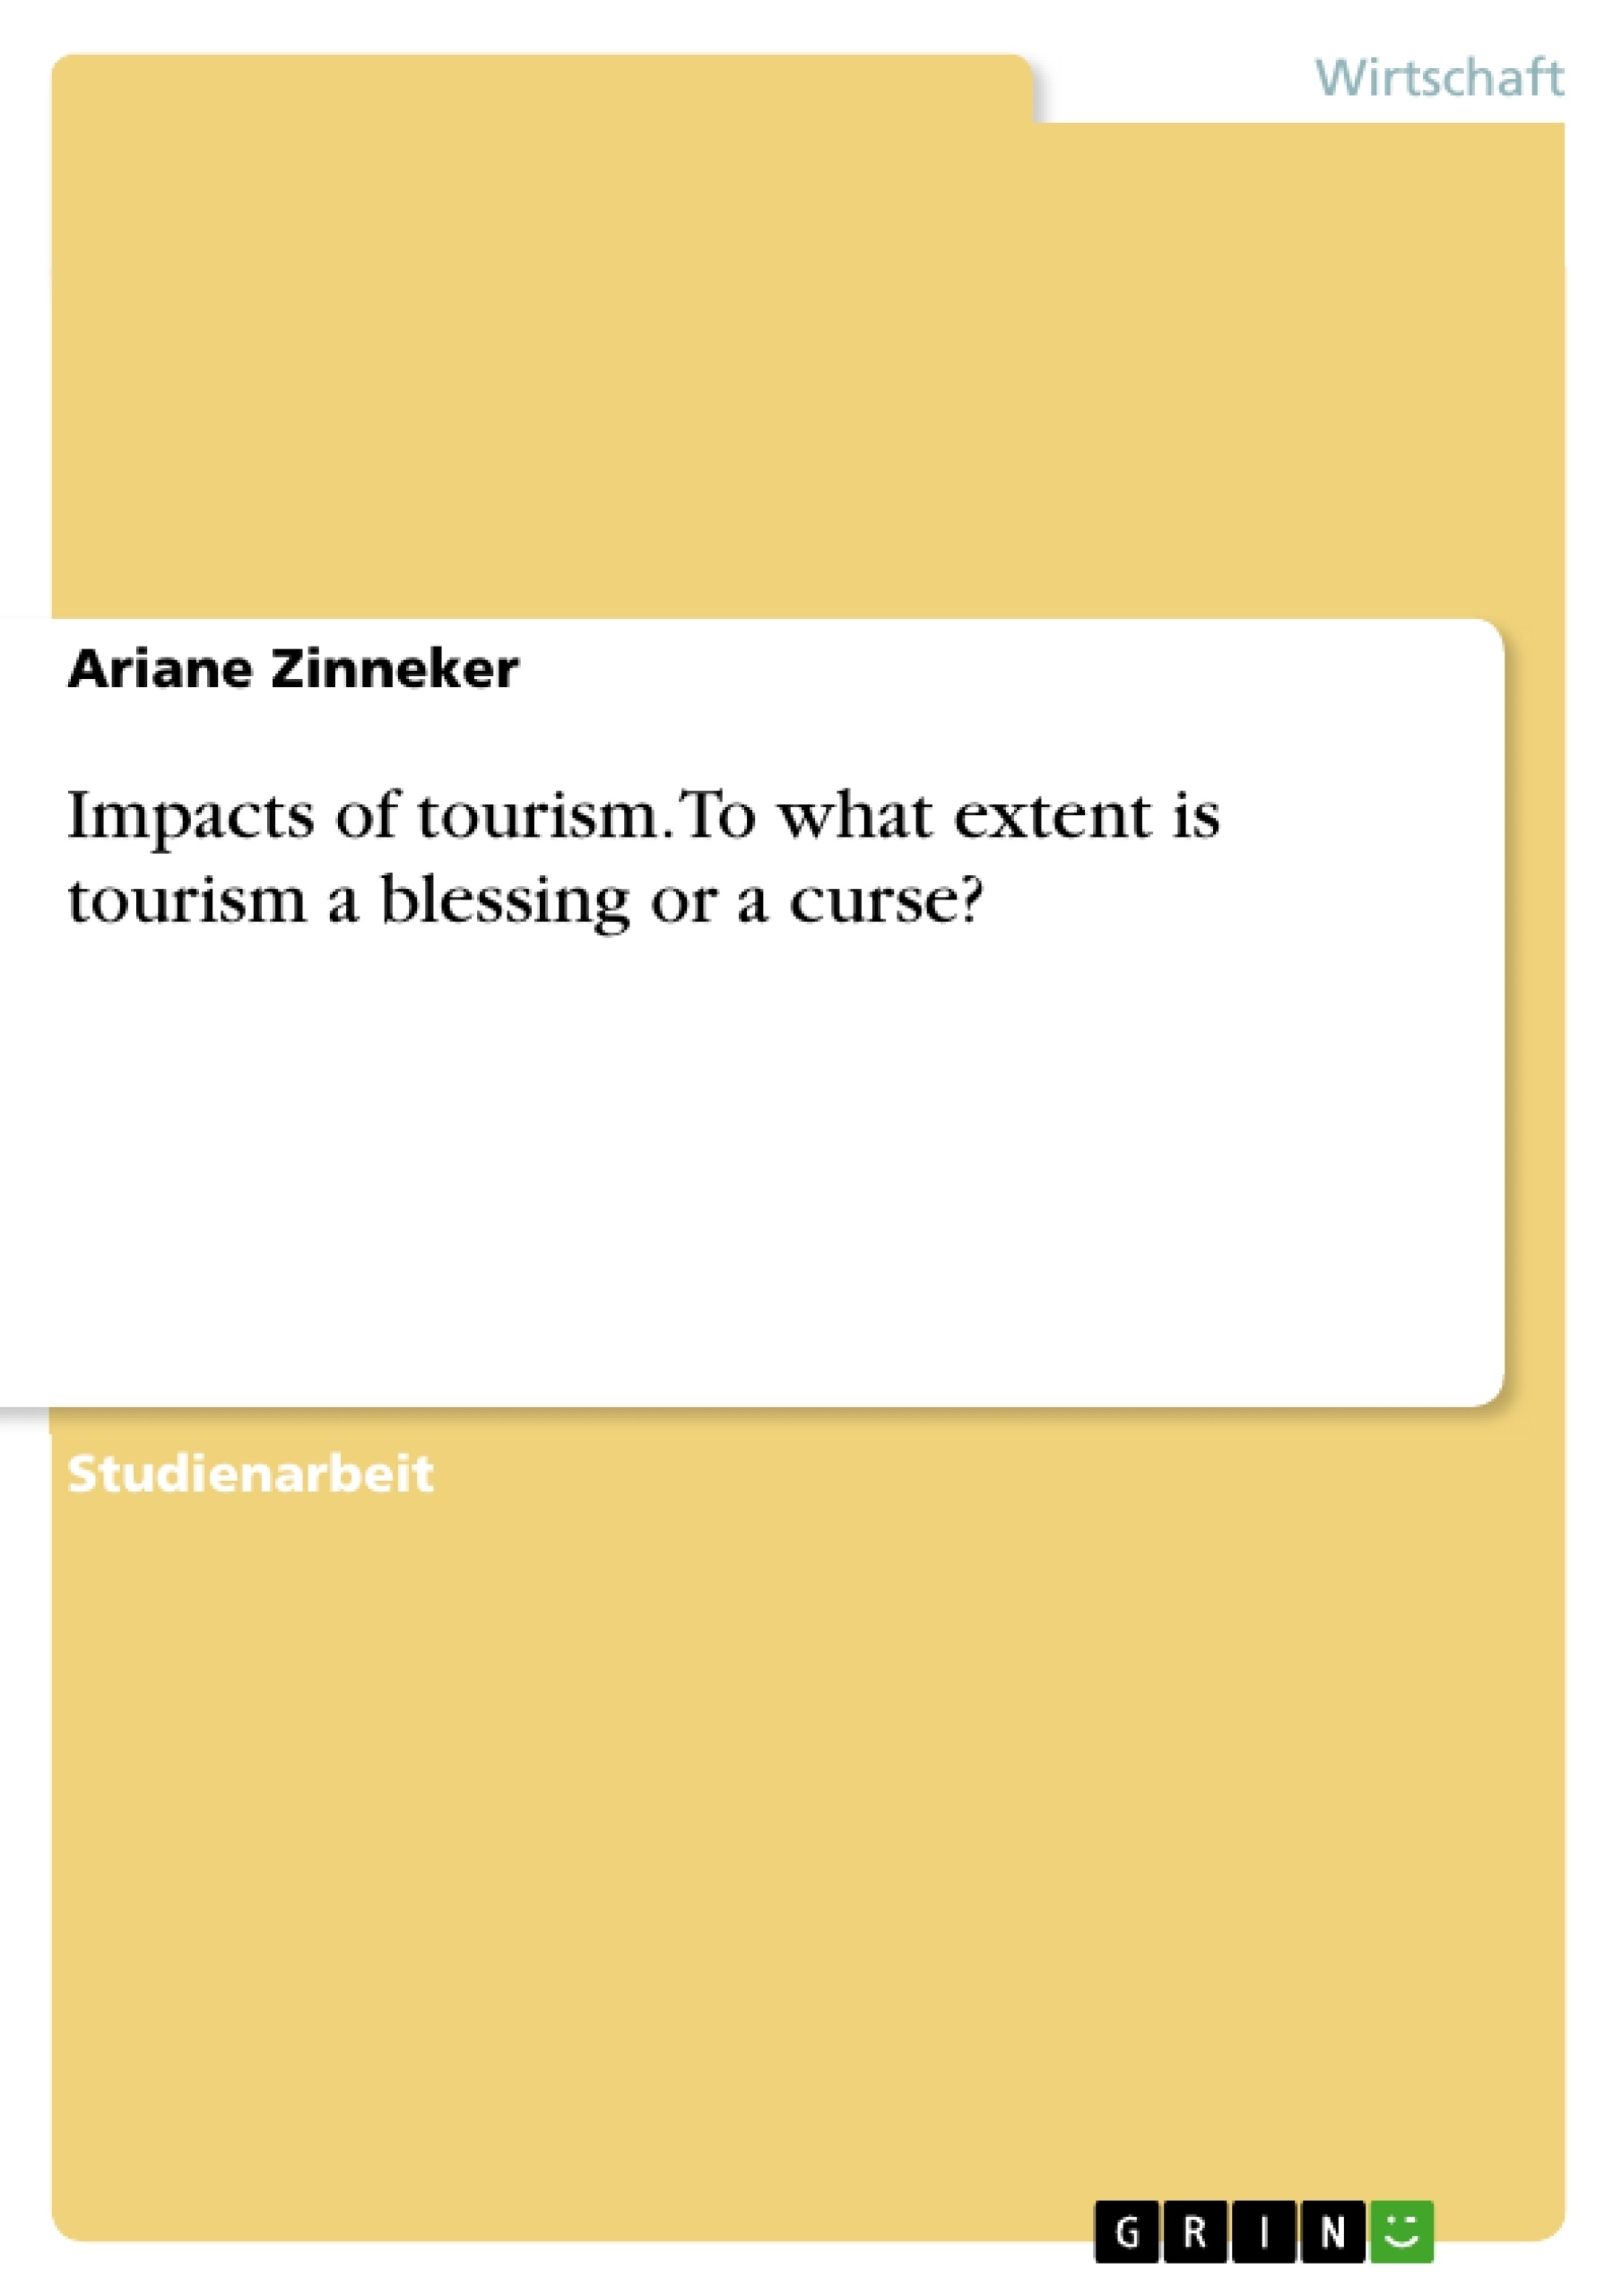 Title: Impacts of tourism. To what extent is tourism a blessing or a curse?